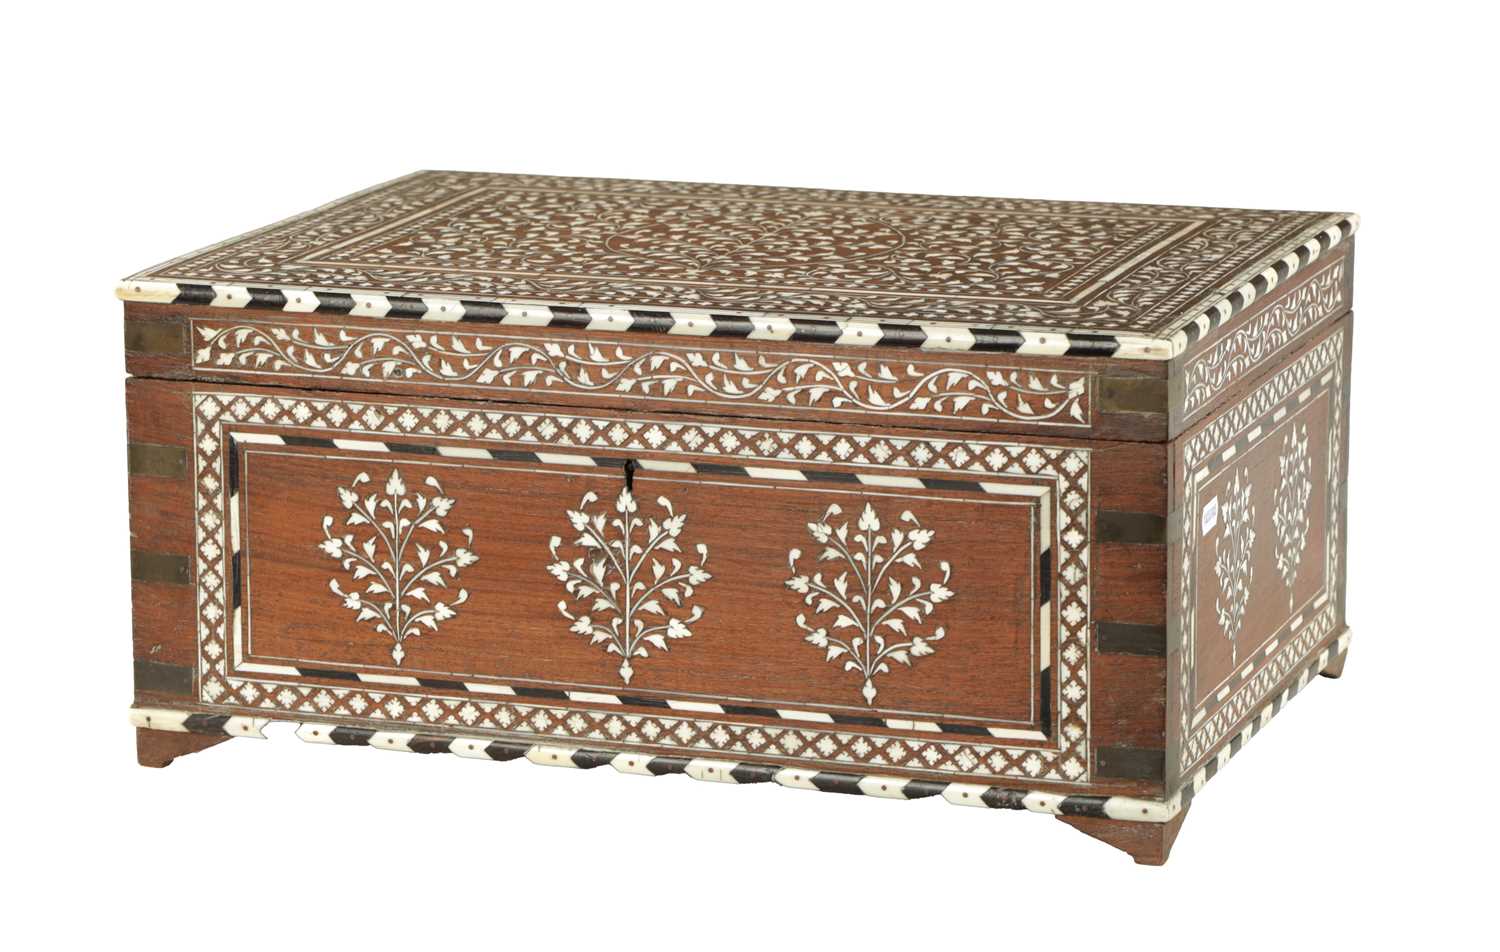 A LARGE LATE 19TH CENTURY ANGLO-INDIAN IVORY AND EBONY INLAID WORKBOX